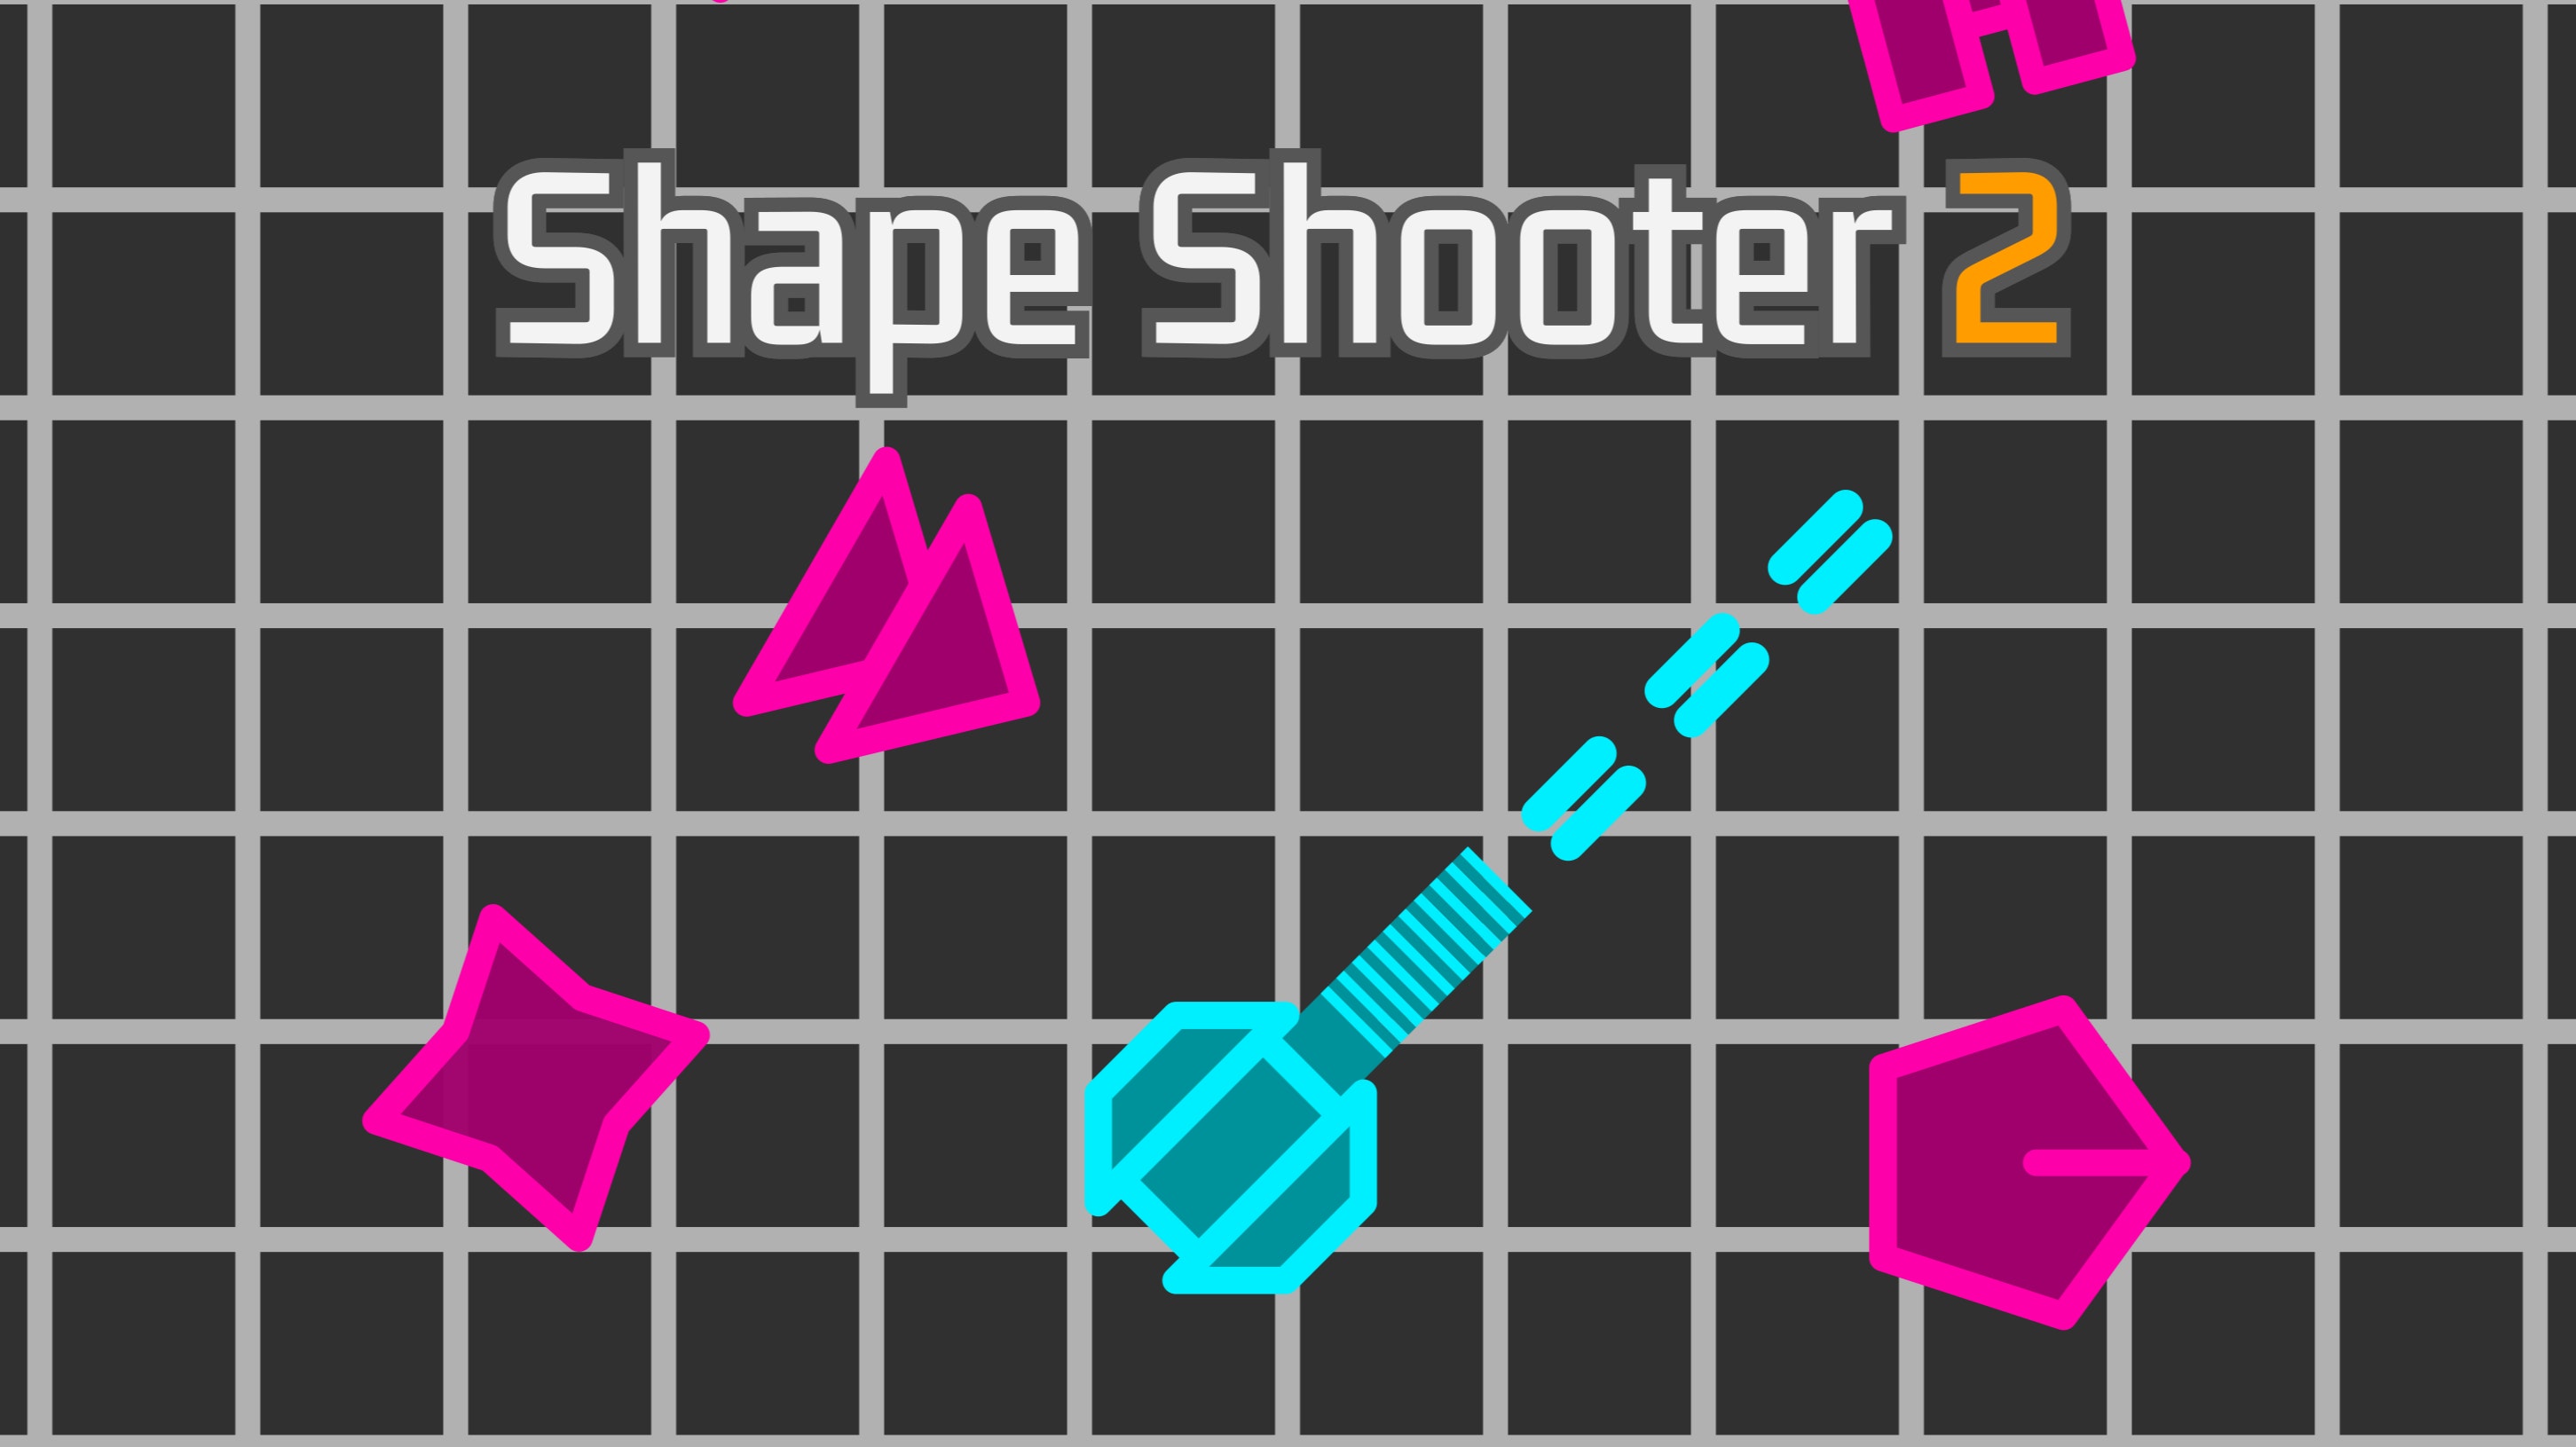 Crazy Shooters 🕹️ Play on CrazyGames